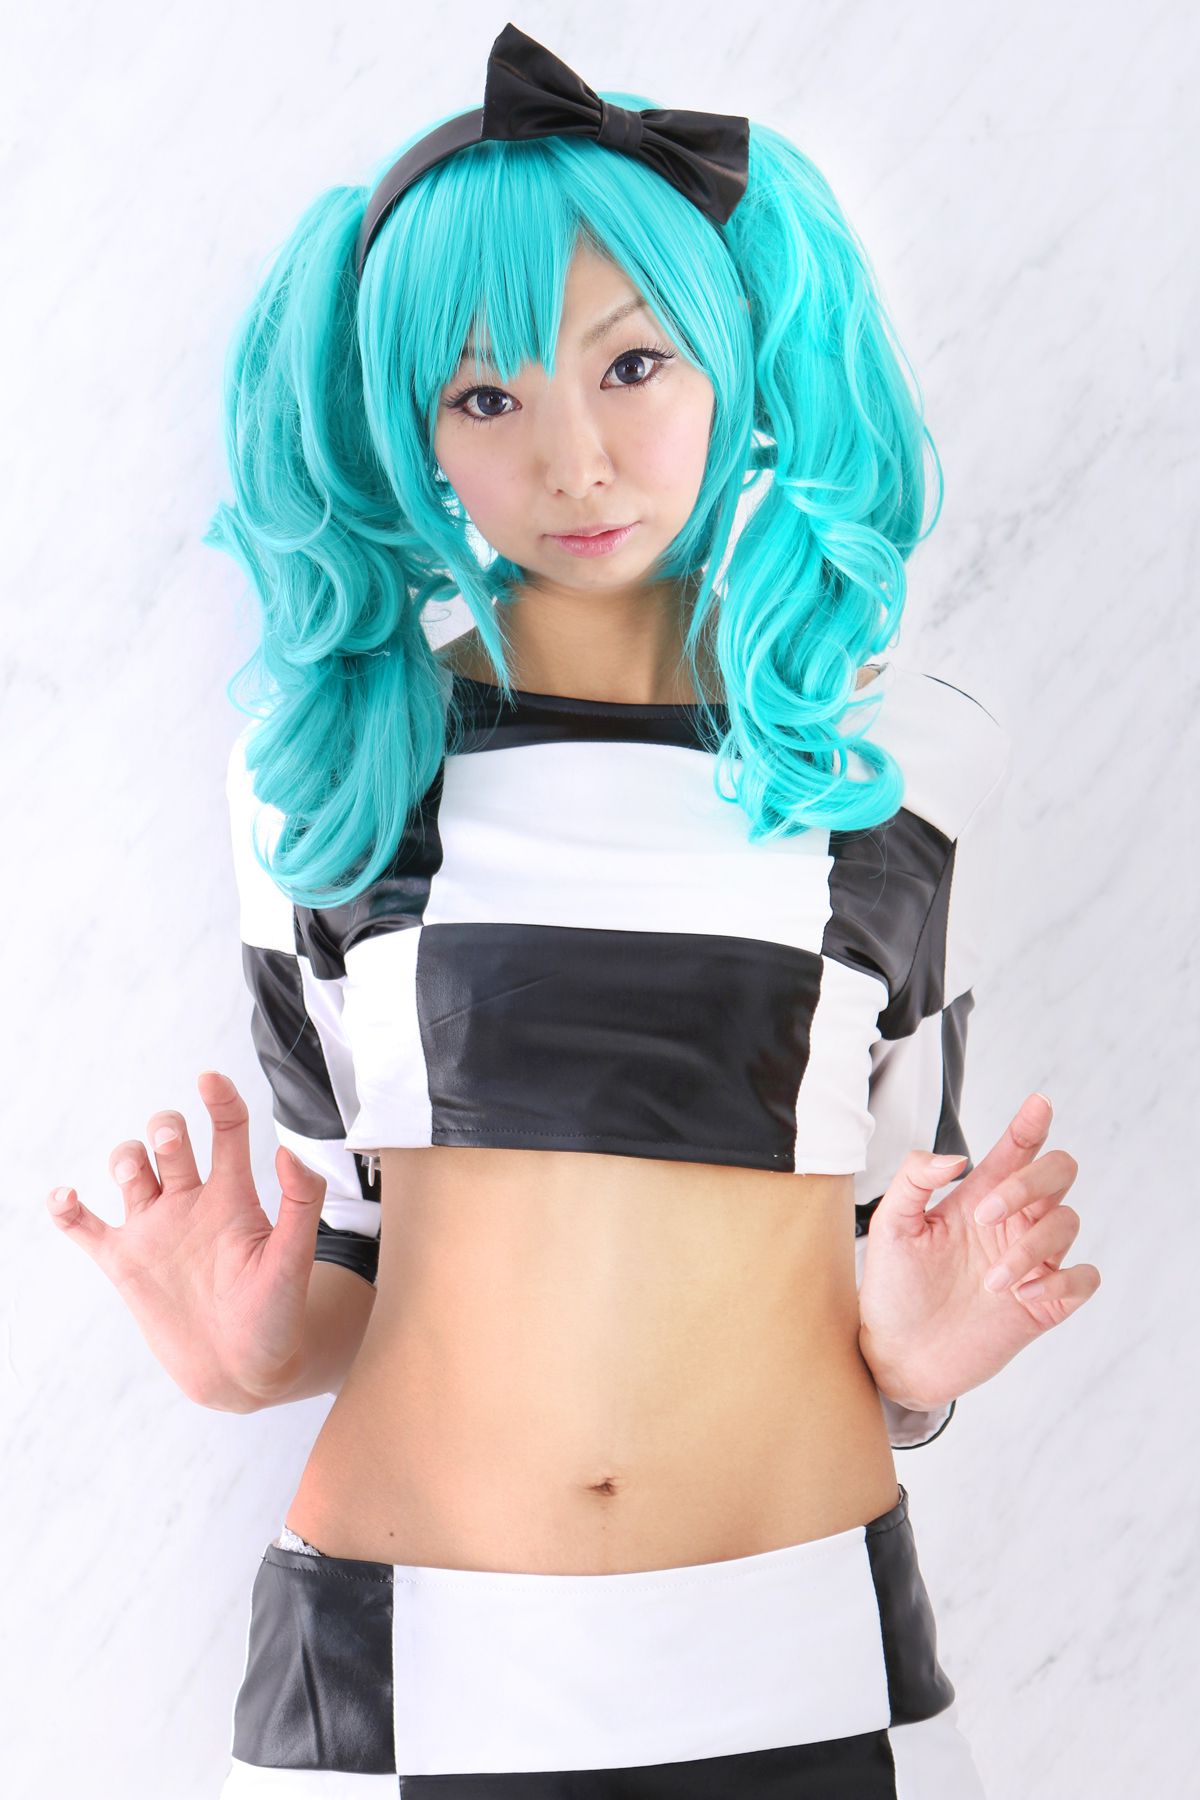 taotuhome[Cosplay套图] New Hatsune Miku from Vocaloid - So Sexy第1张